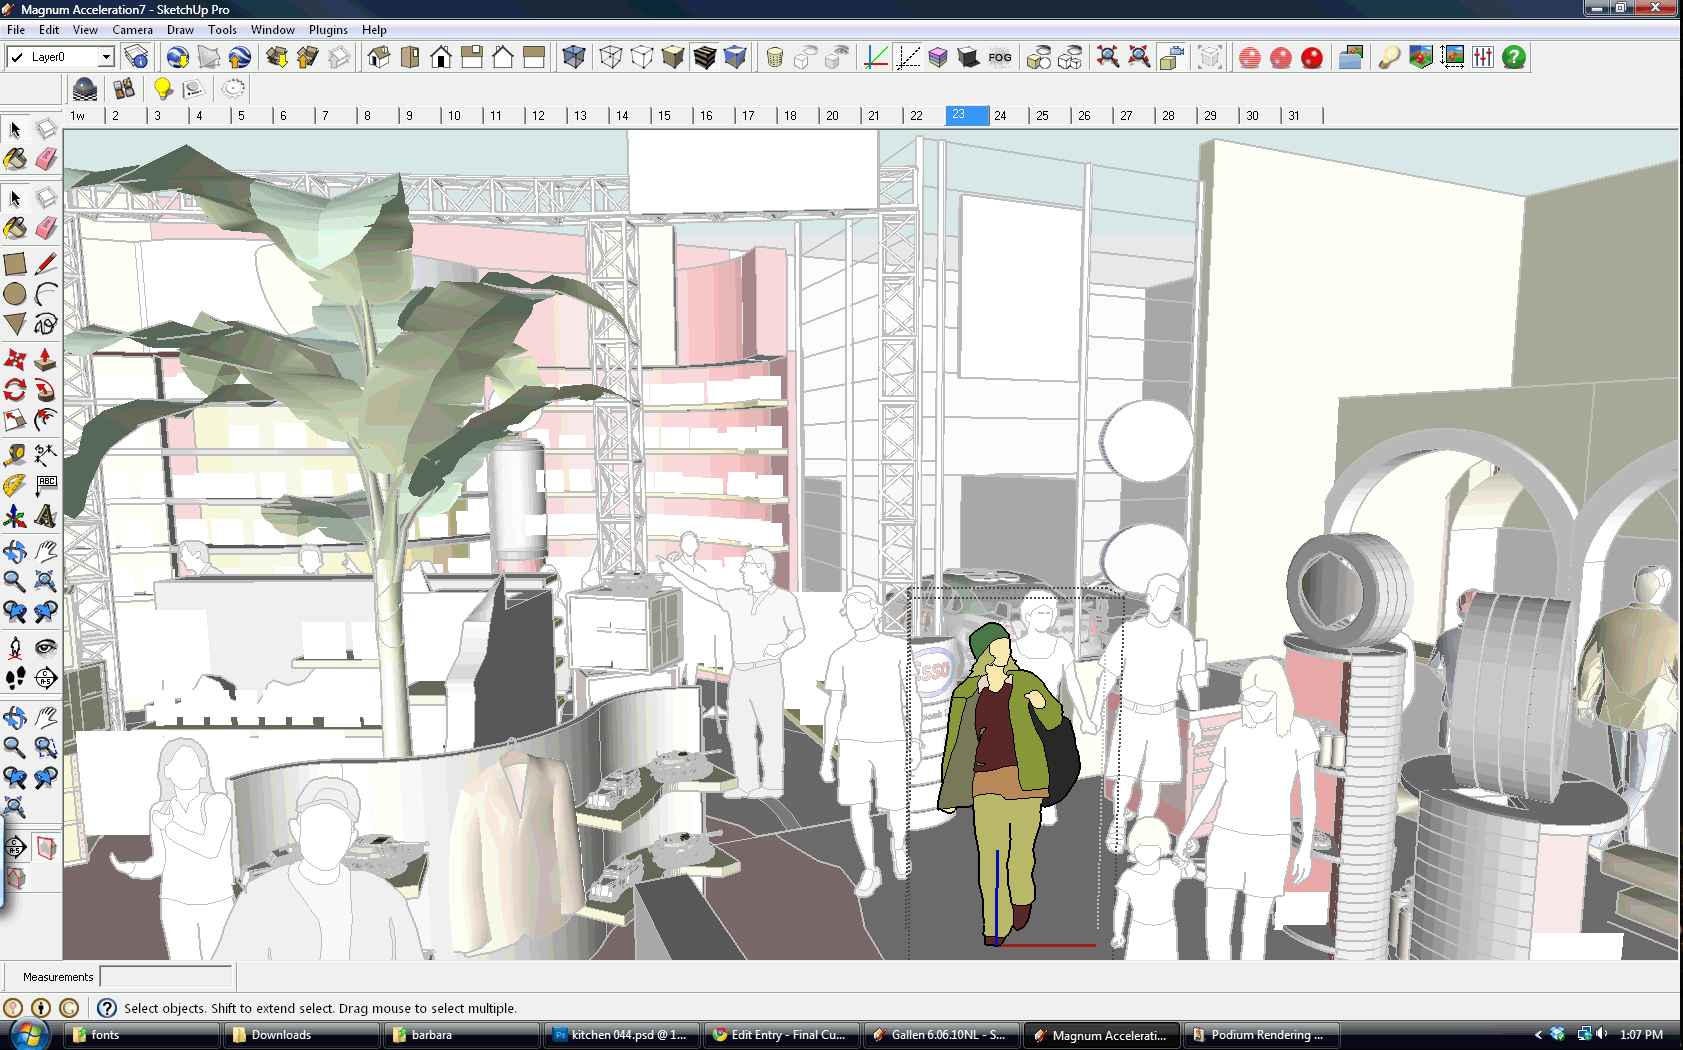 sketchup produces bug splat all the time